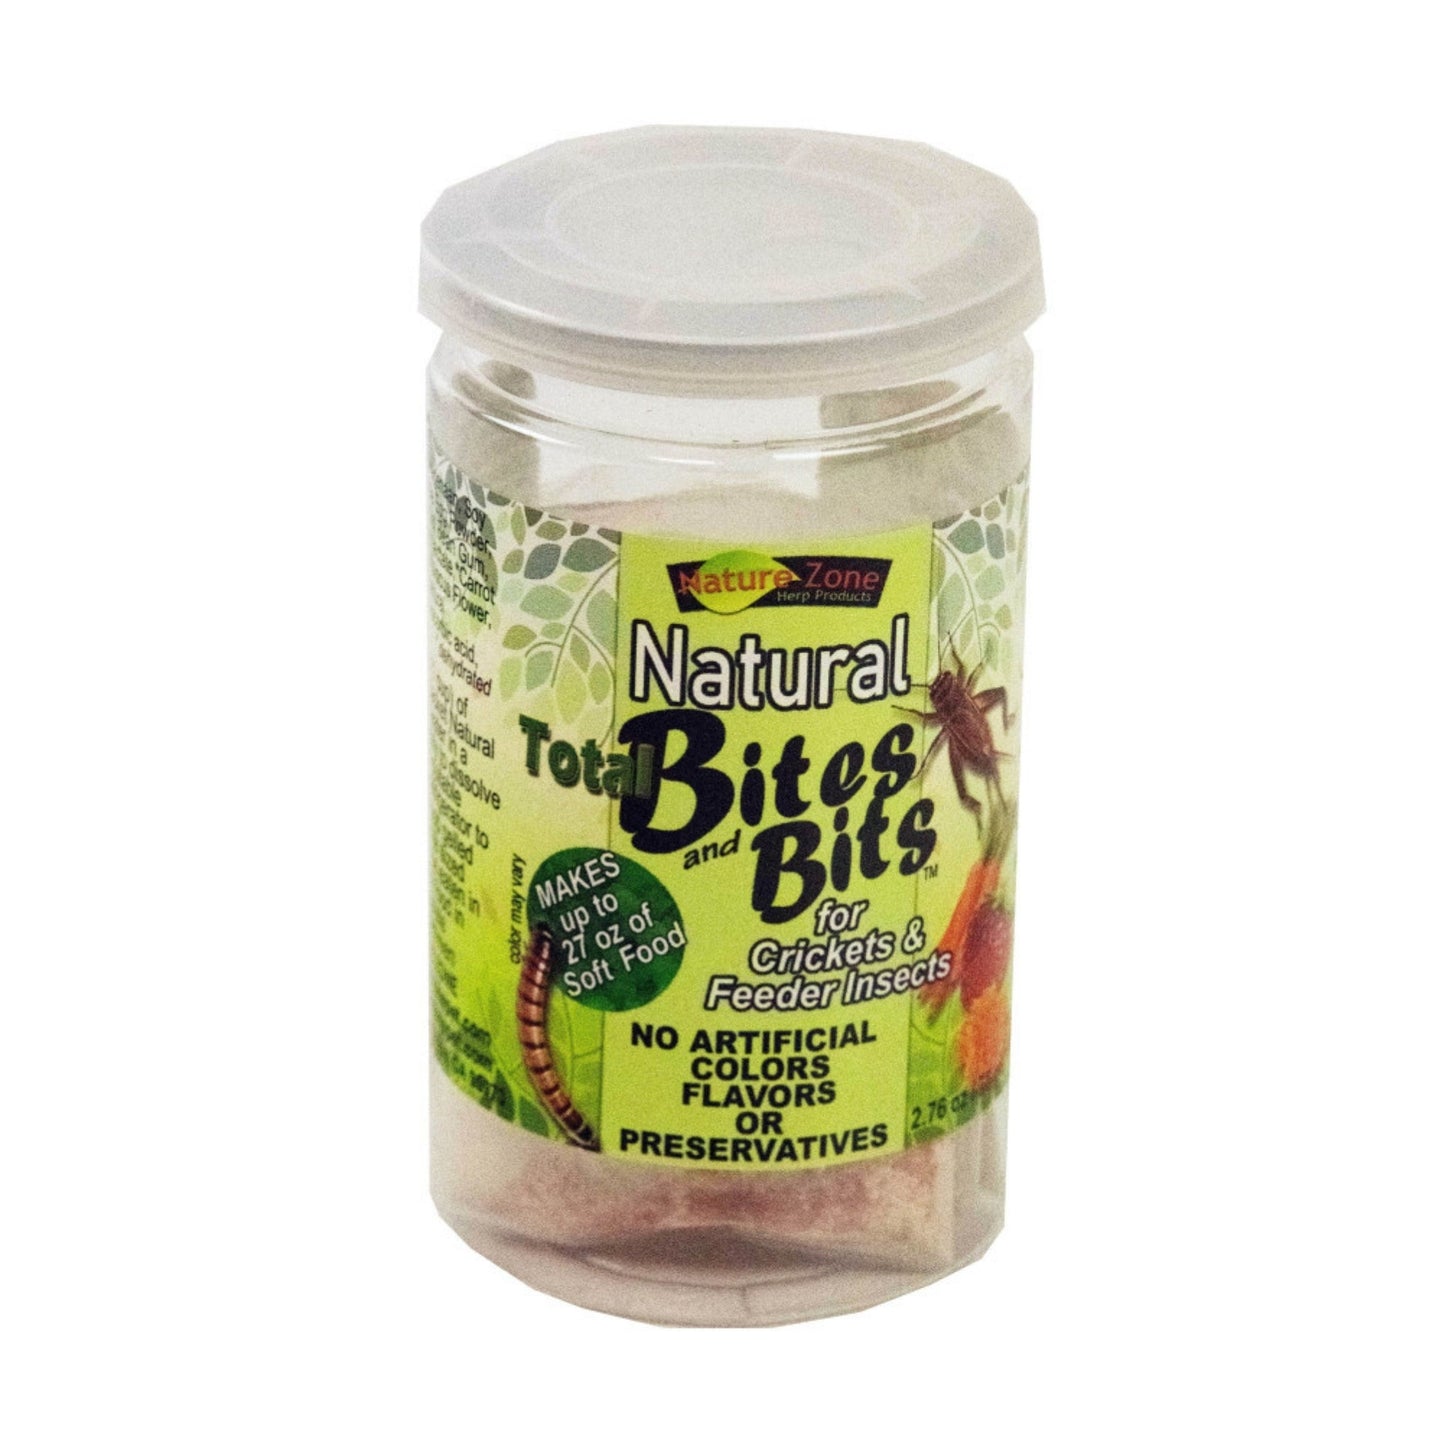 Nature Zone Natural Total Bites & Bits for Crickets & Feeder insects 1ea/2.76oz.